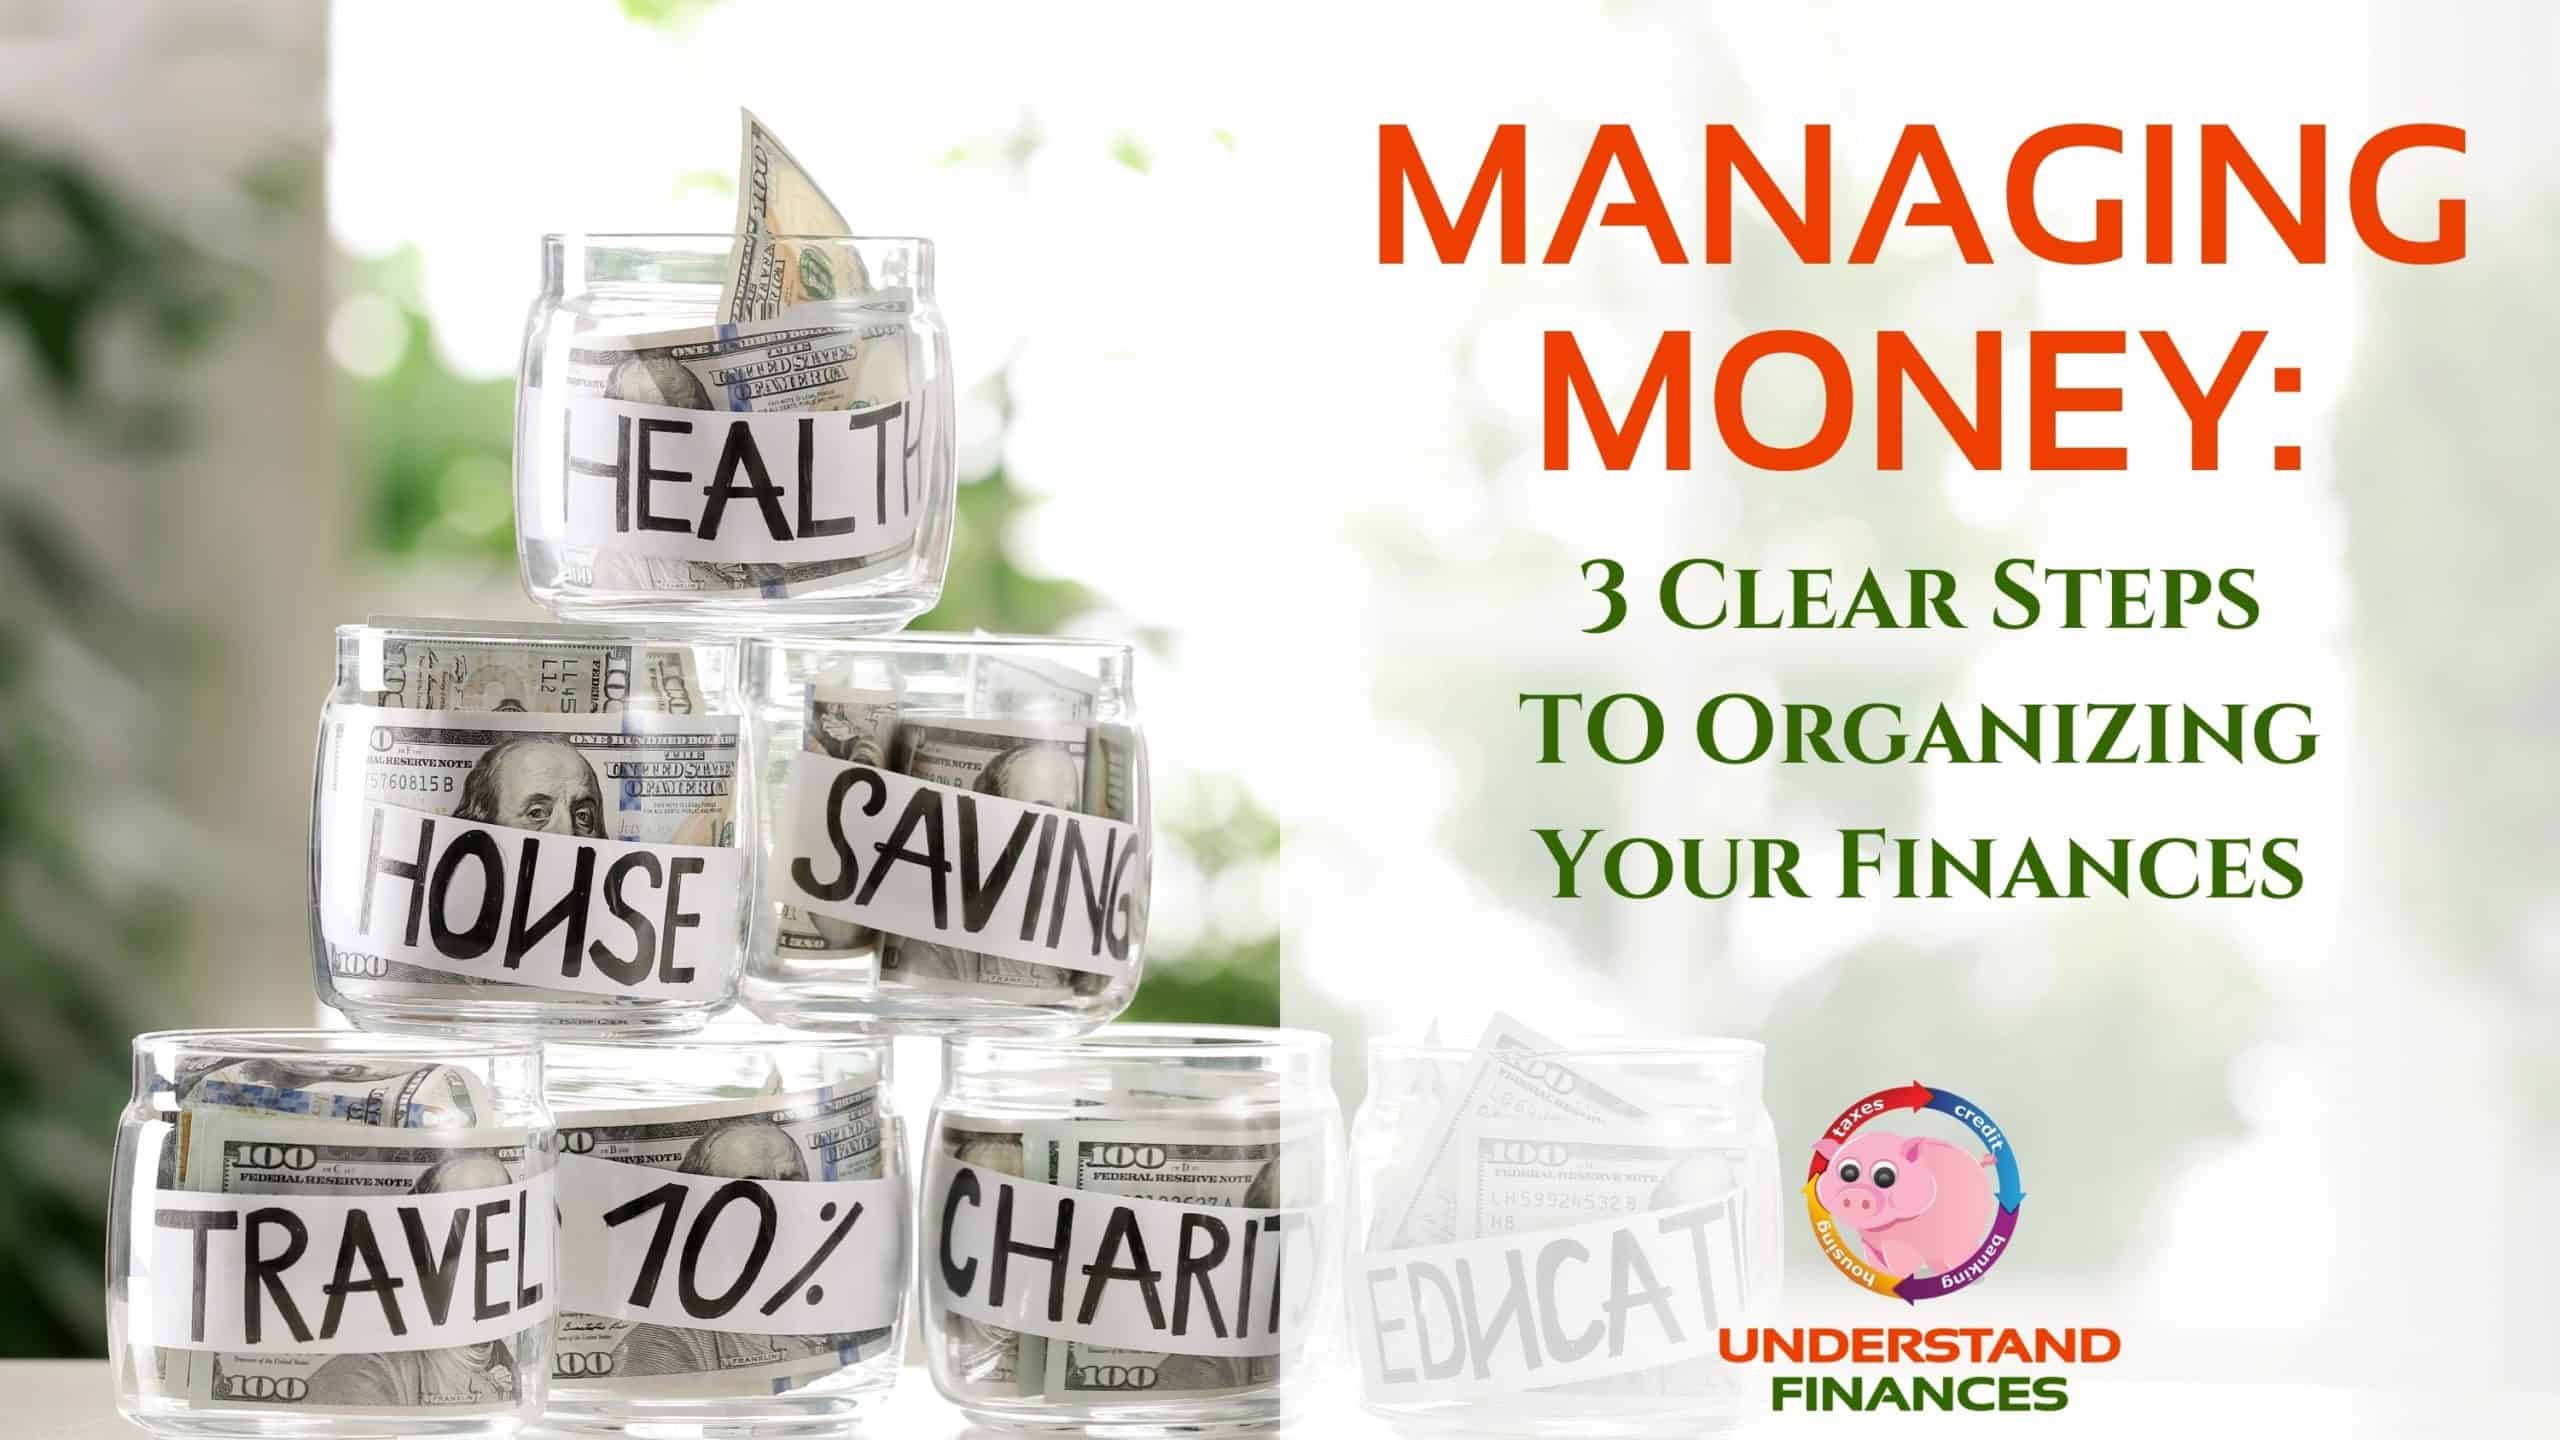 Managing Money: 3 Clear Steps To Organizing Your Finances